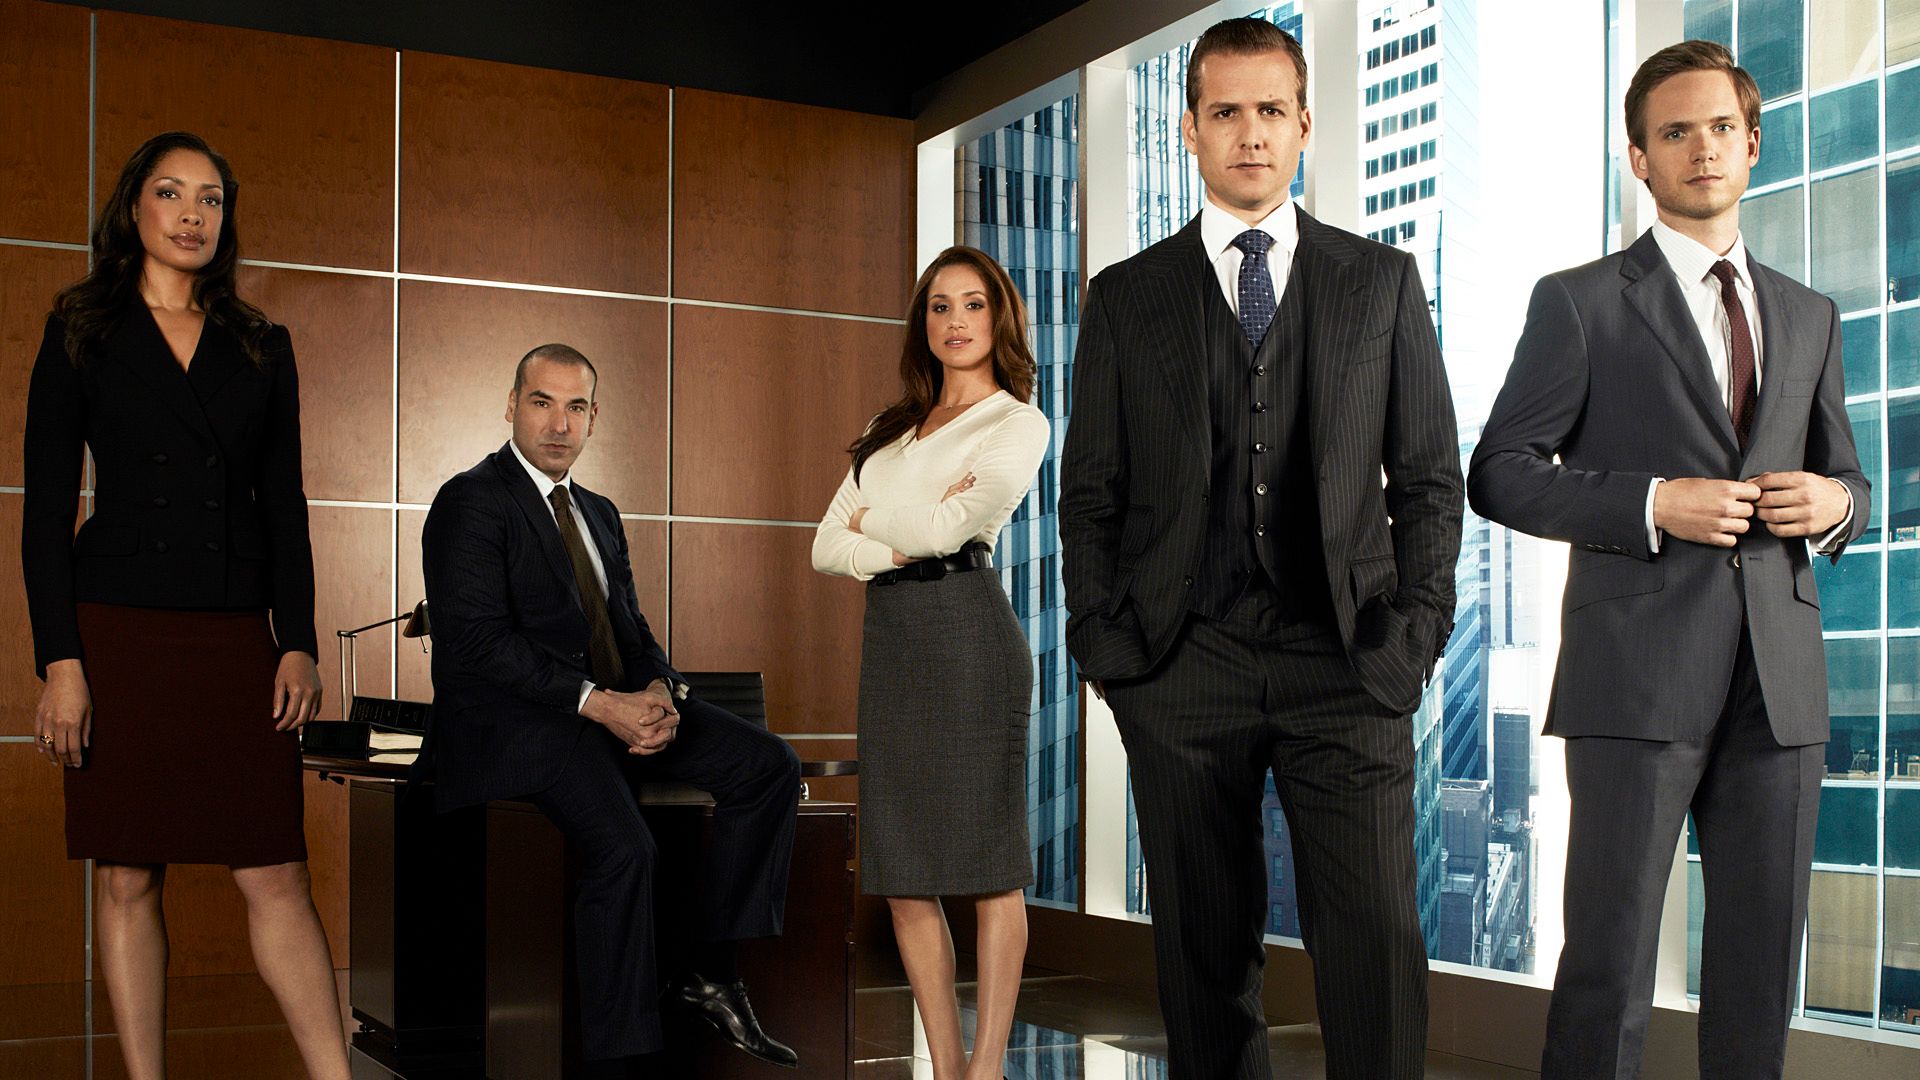 Suits background